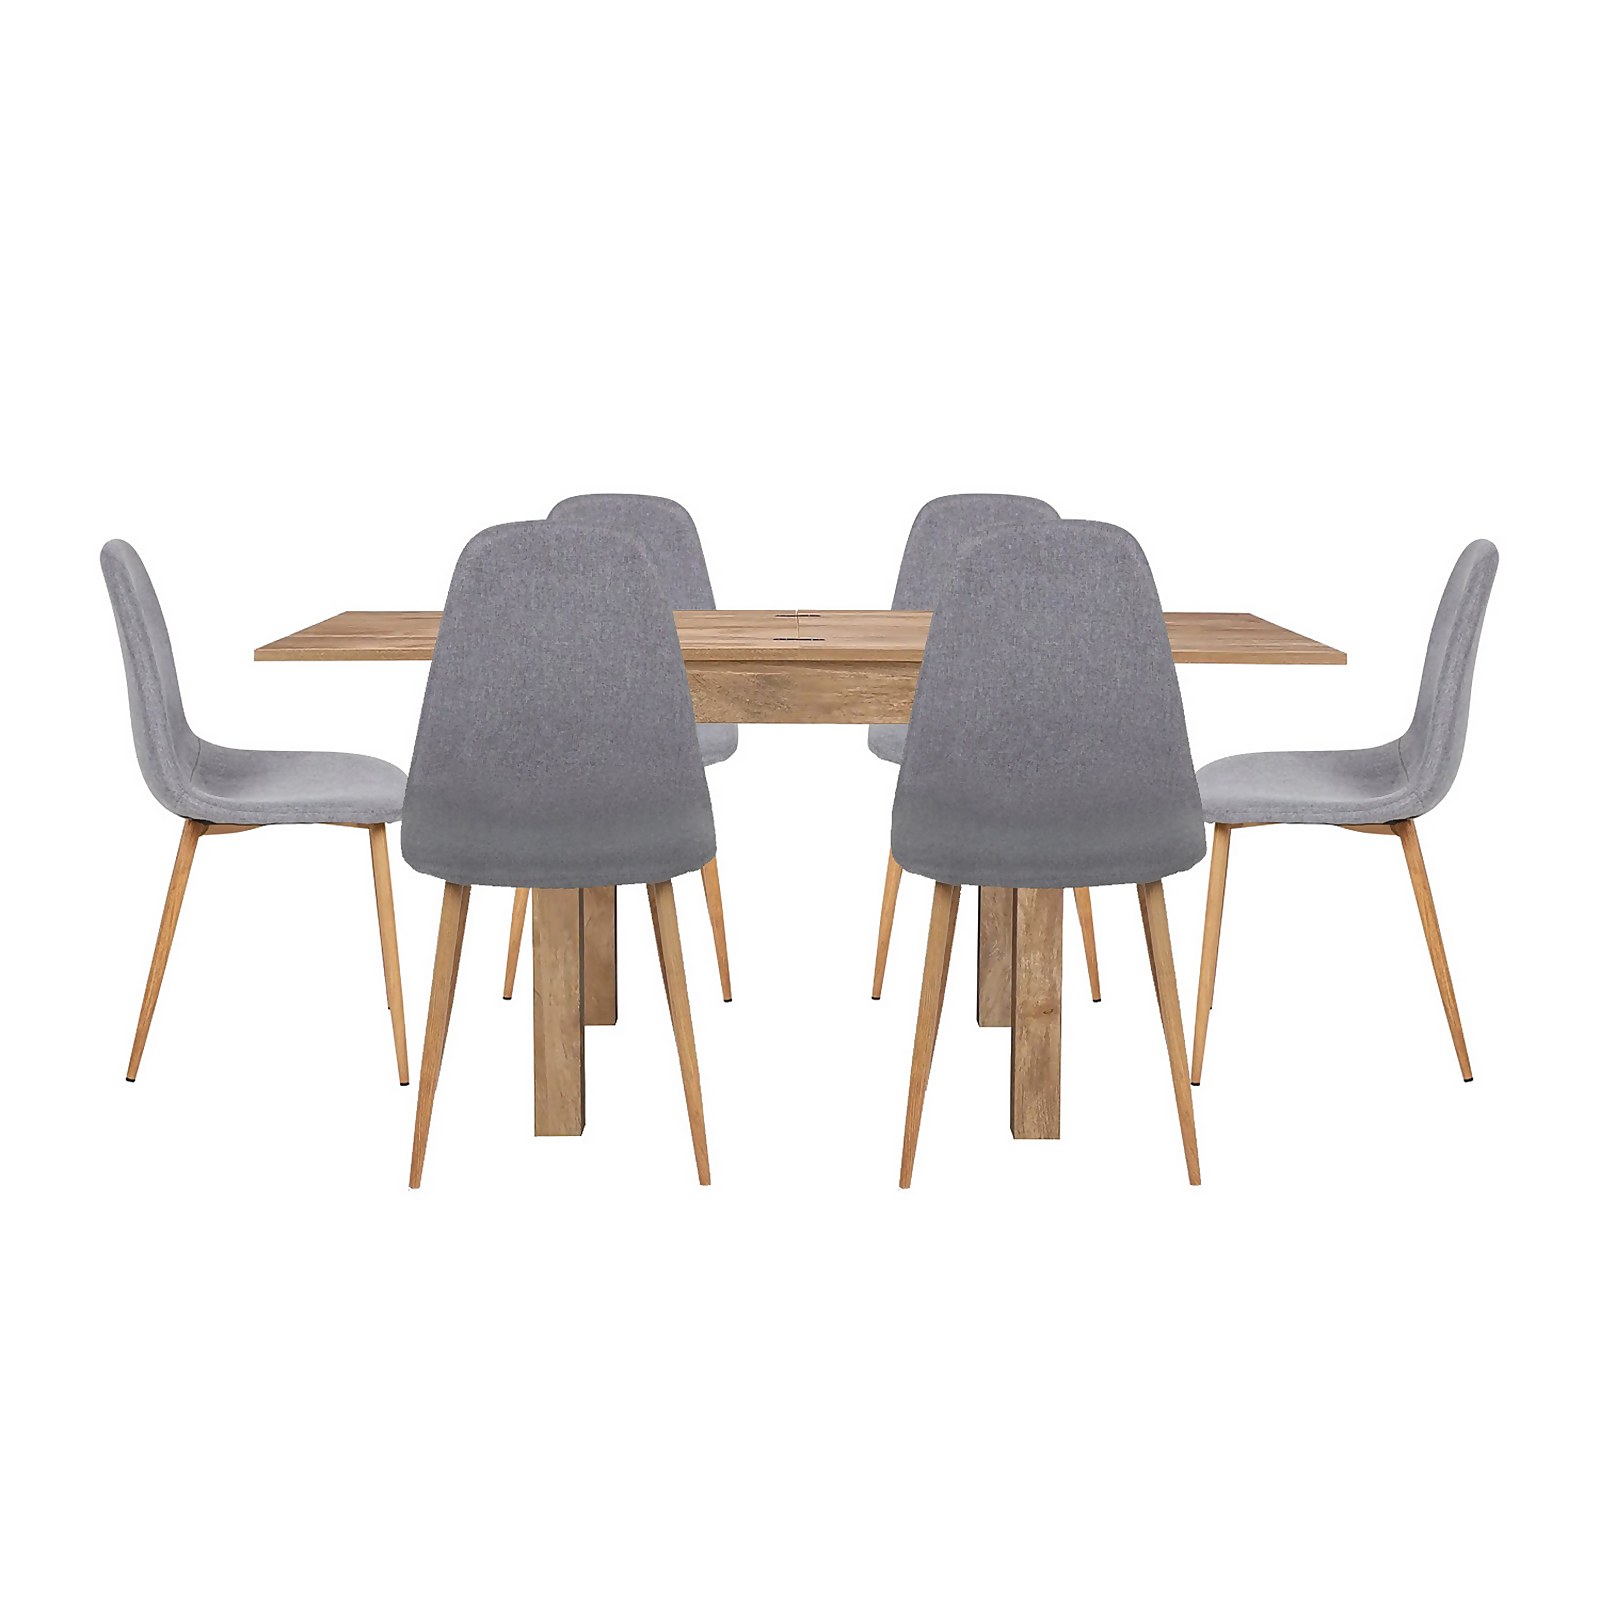 Photo of Kubu Extending Dining Table And 6 Ludlow Chairs - Grey